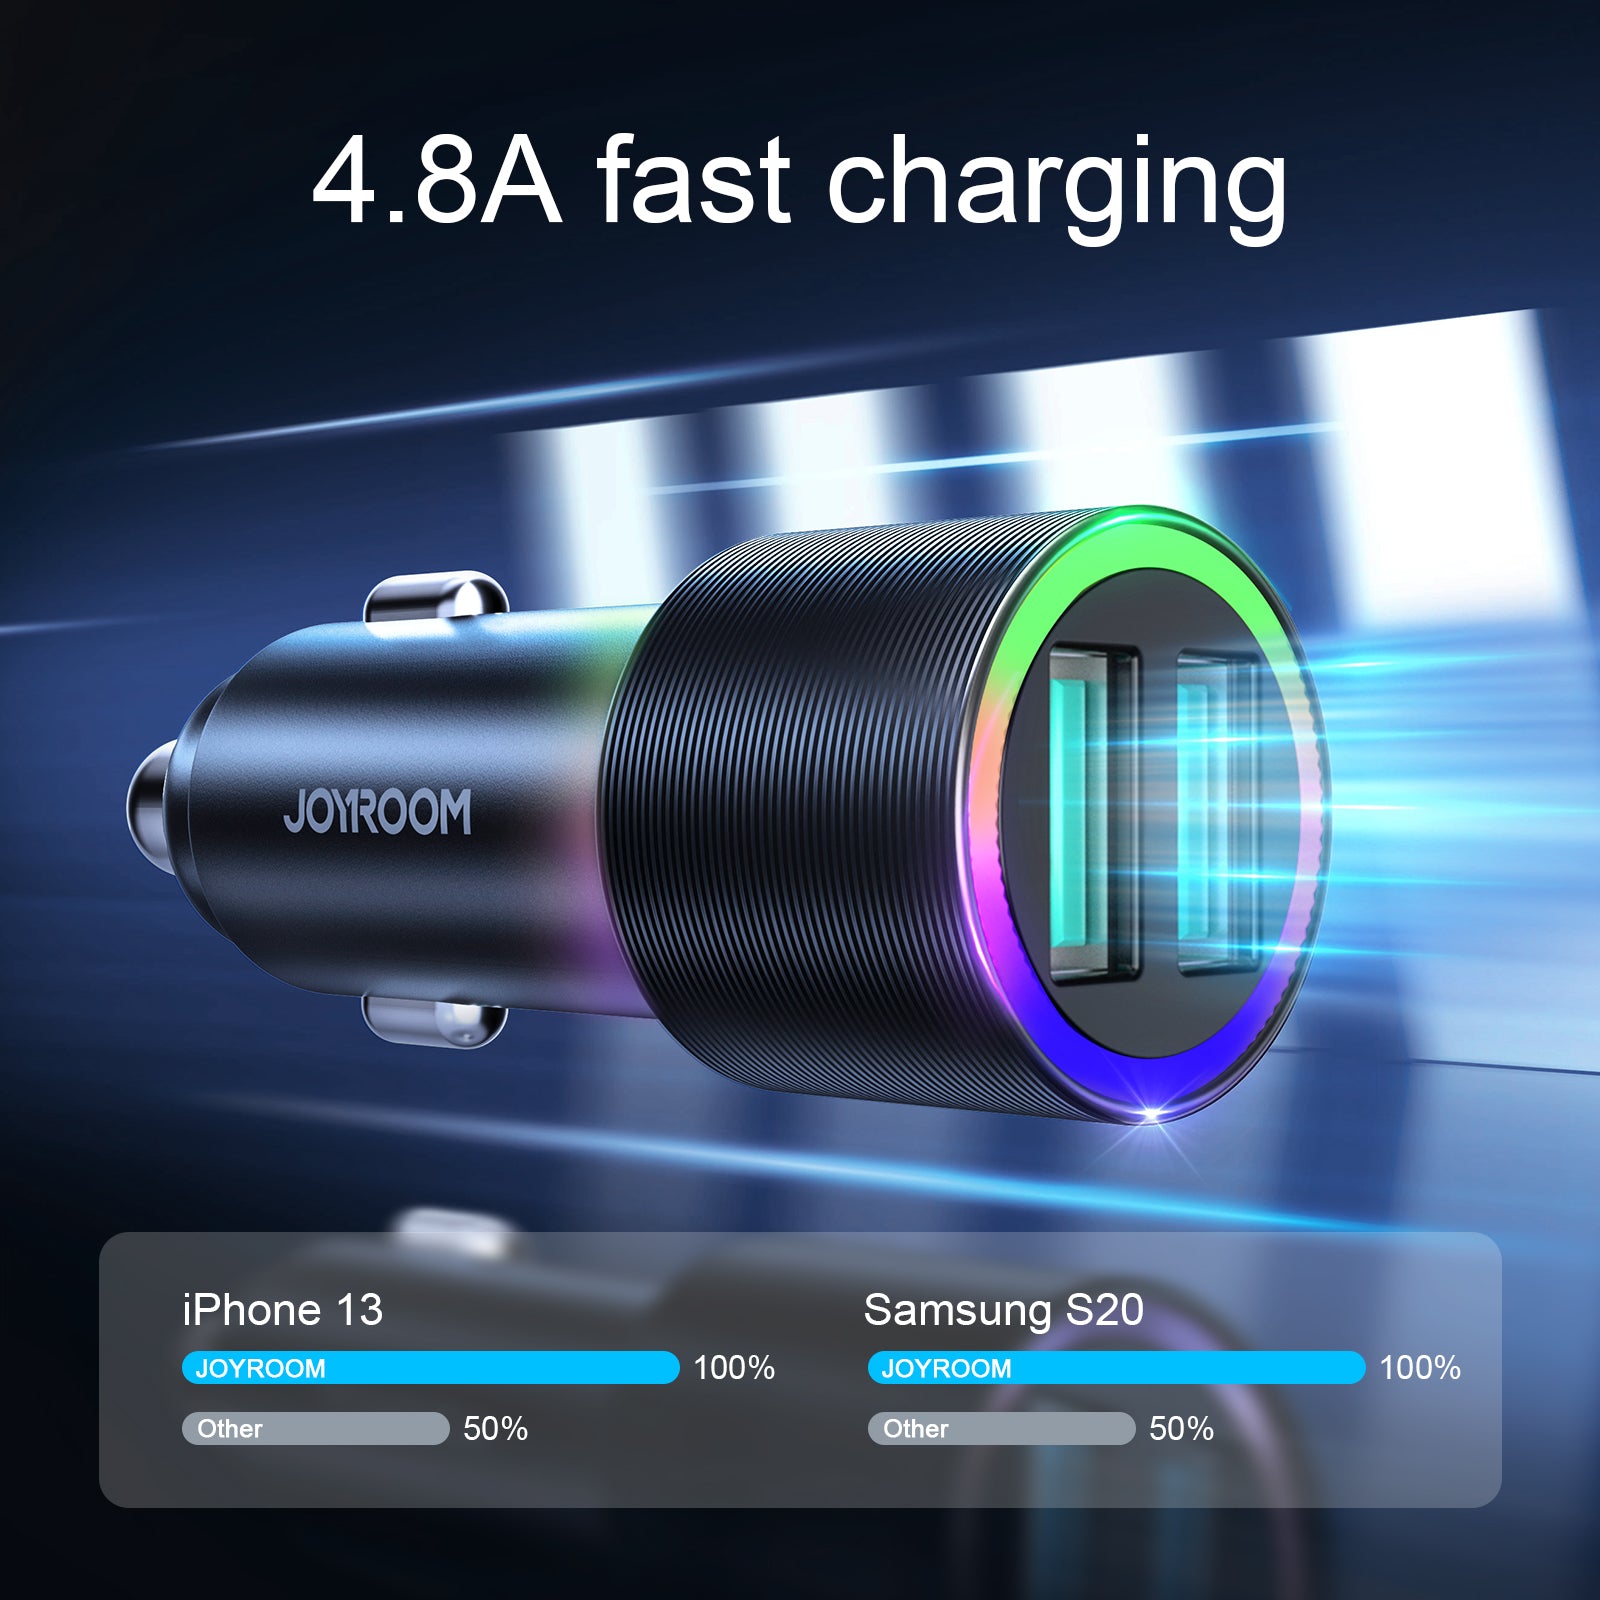 4.8A fast charging